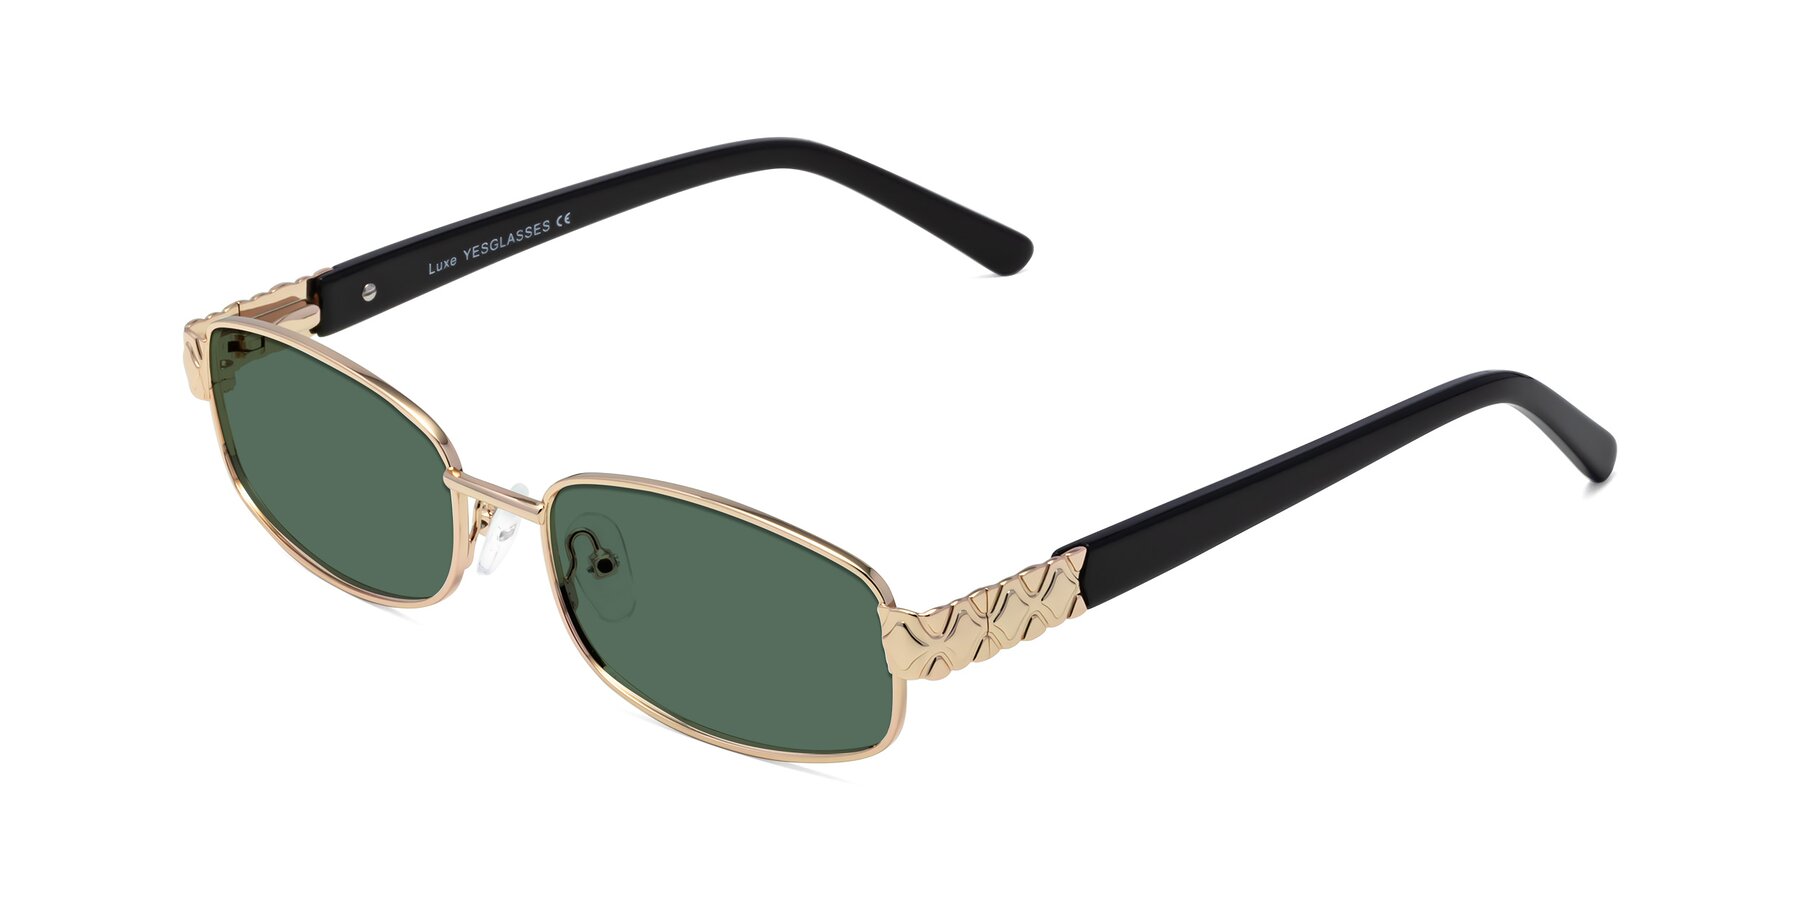 Angle of Luxe in Rose Gold with Green Polarized Lenses